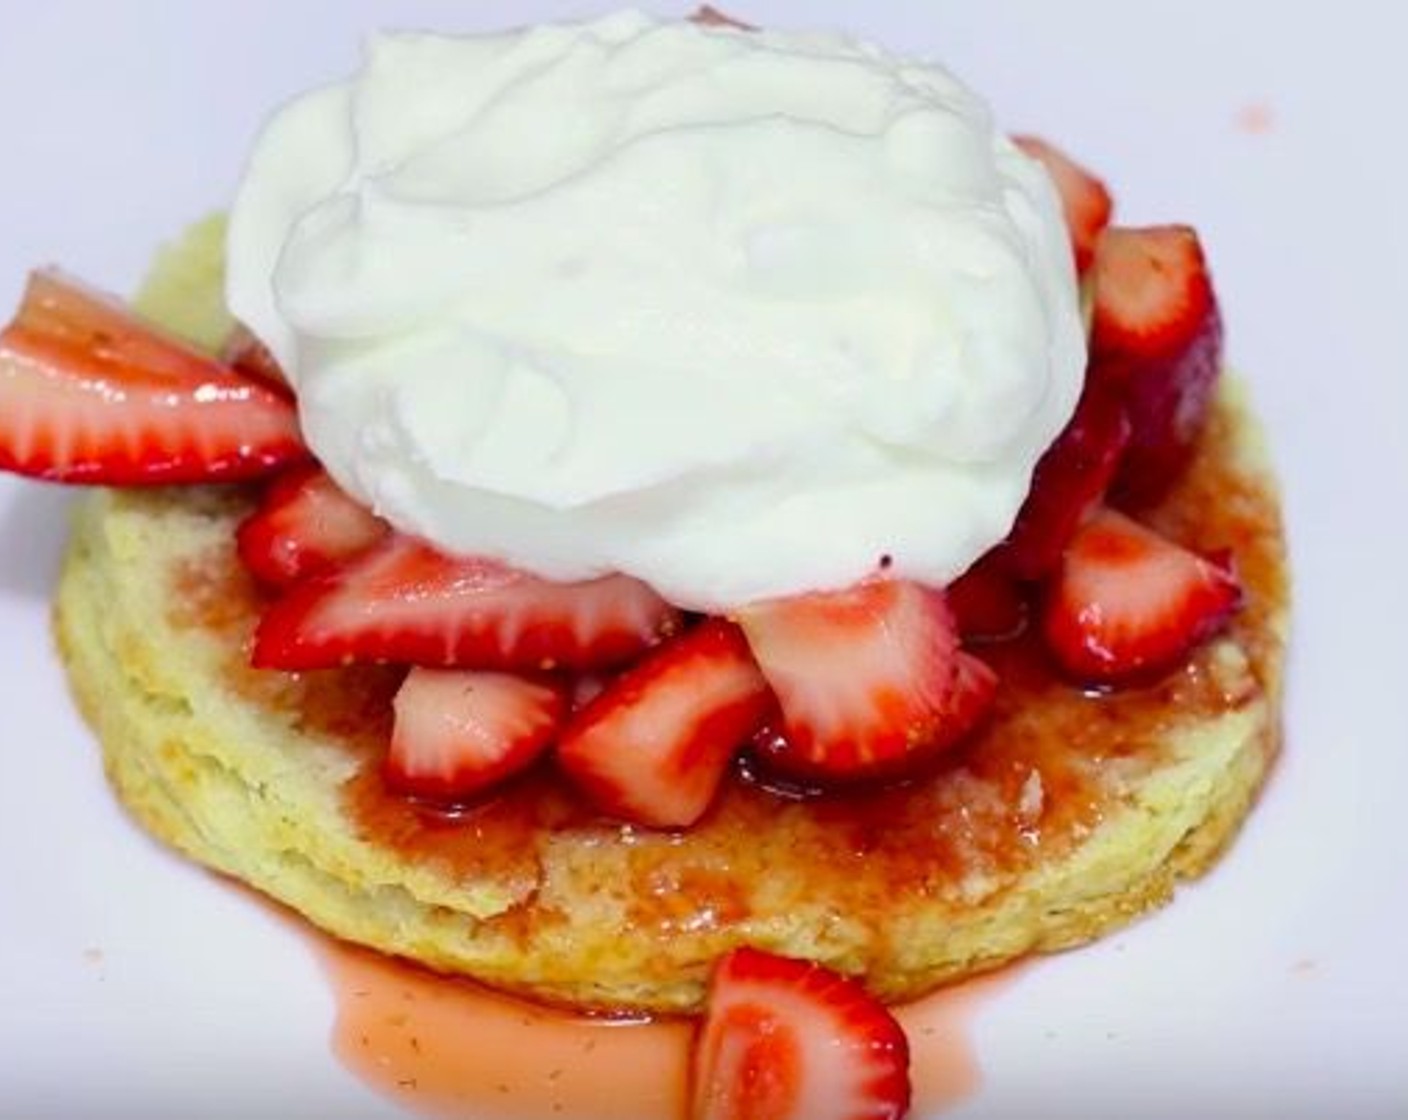 step 7 Take out the shortcake and cut into half, put strawberries in the center. Served with whipped cream and enjoy!